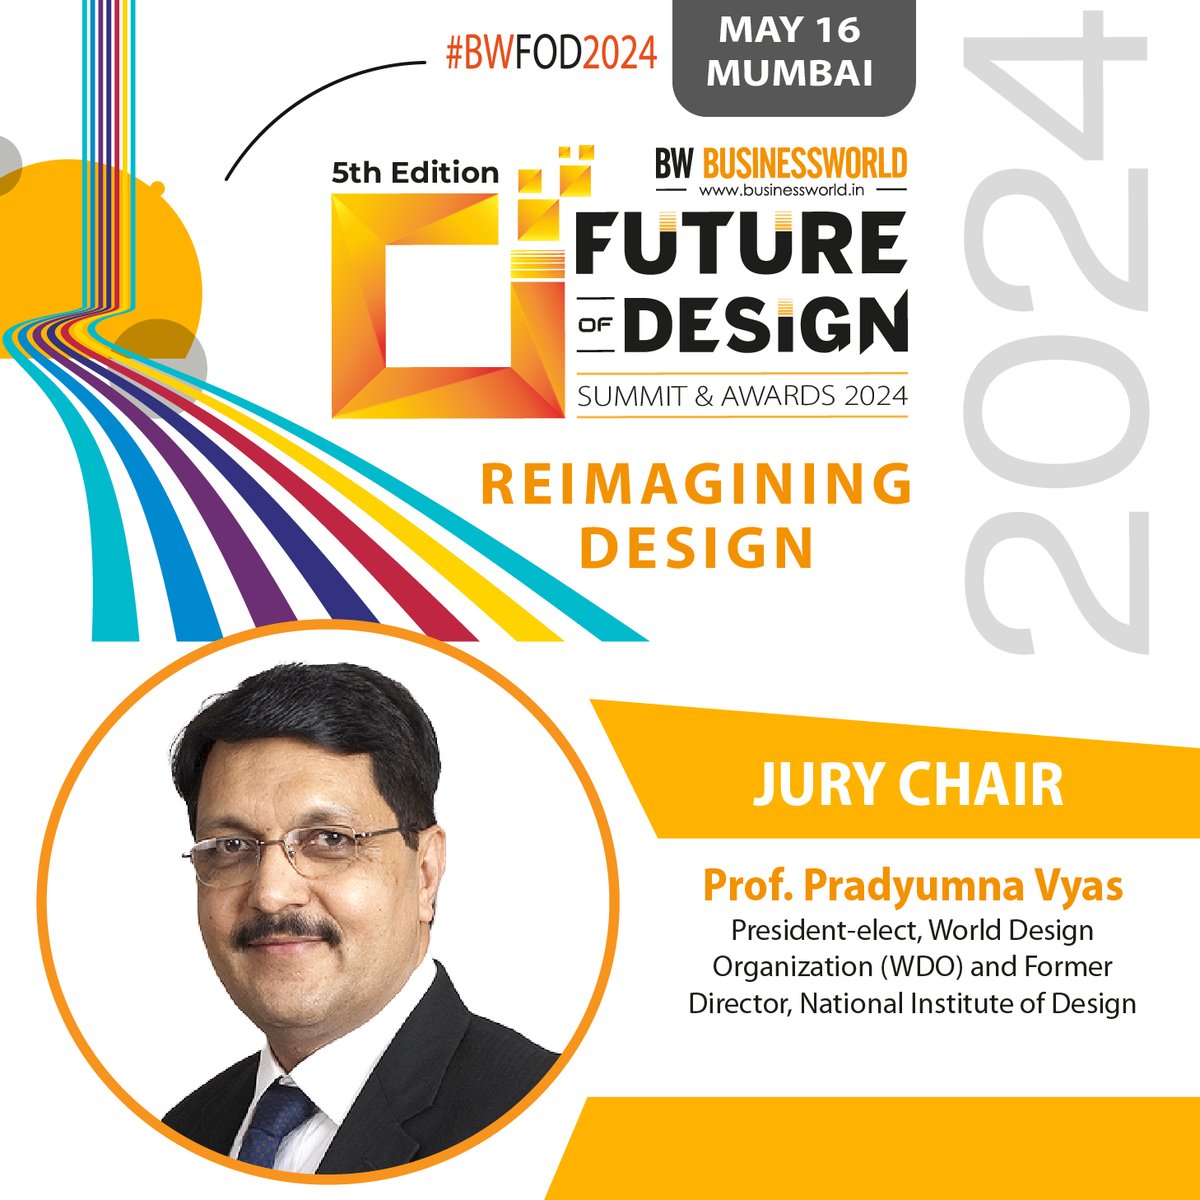 Don't Miss Out on the Buzz!
Nominate Now: bit.ly/BWFutureOfDesi…

Welcoming @vyas_pradyumna, President-elect, World Design Organization & Former Director, National Institute of Design as eminent jury chair for the 5th BW Future of Design #BWFOD.